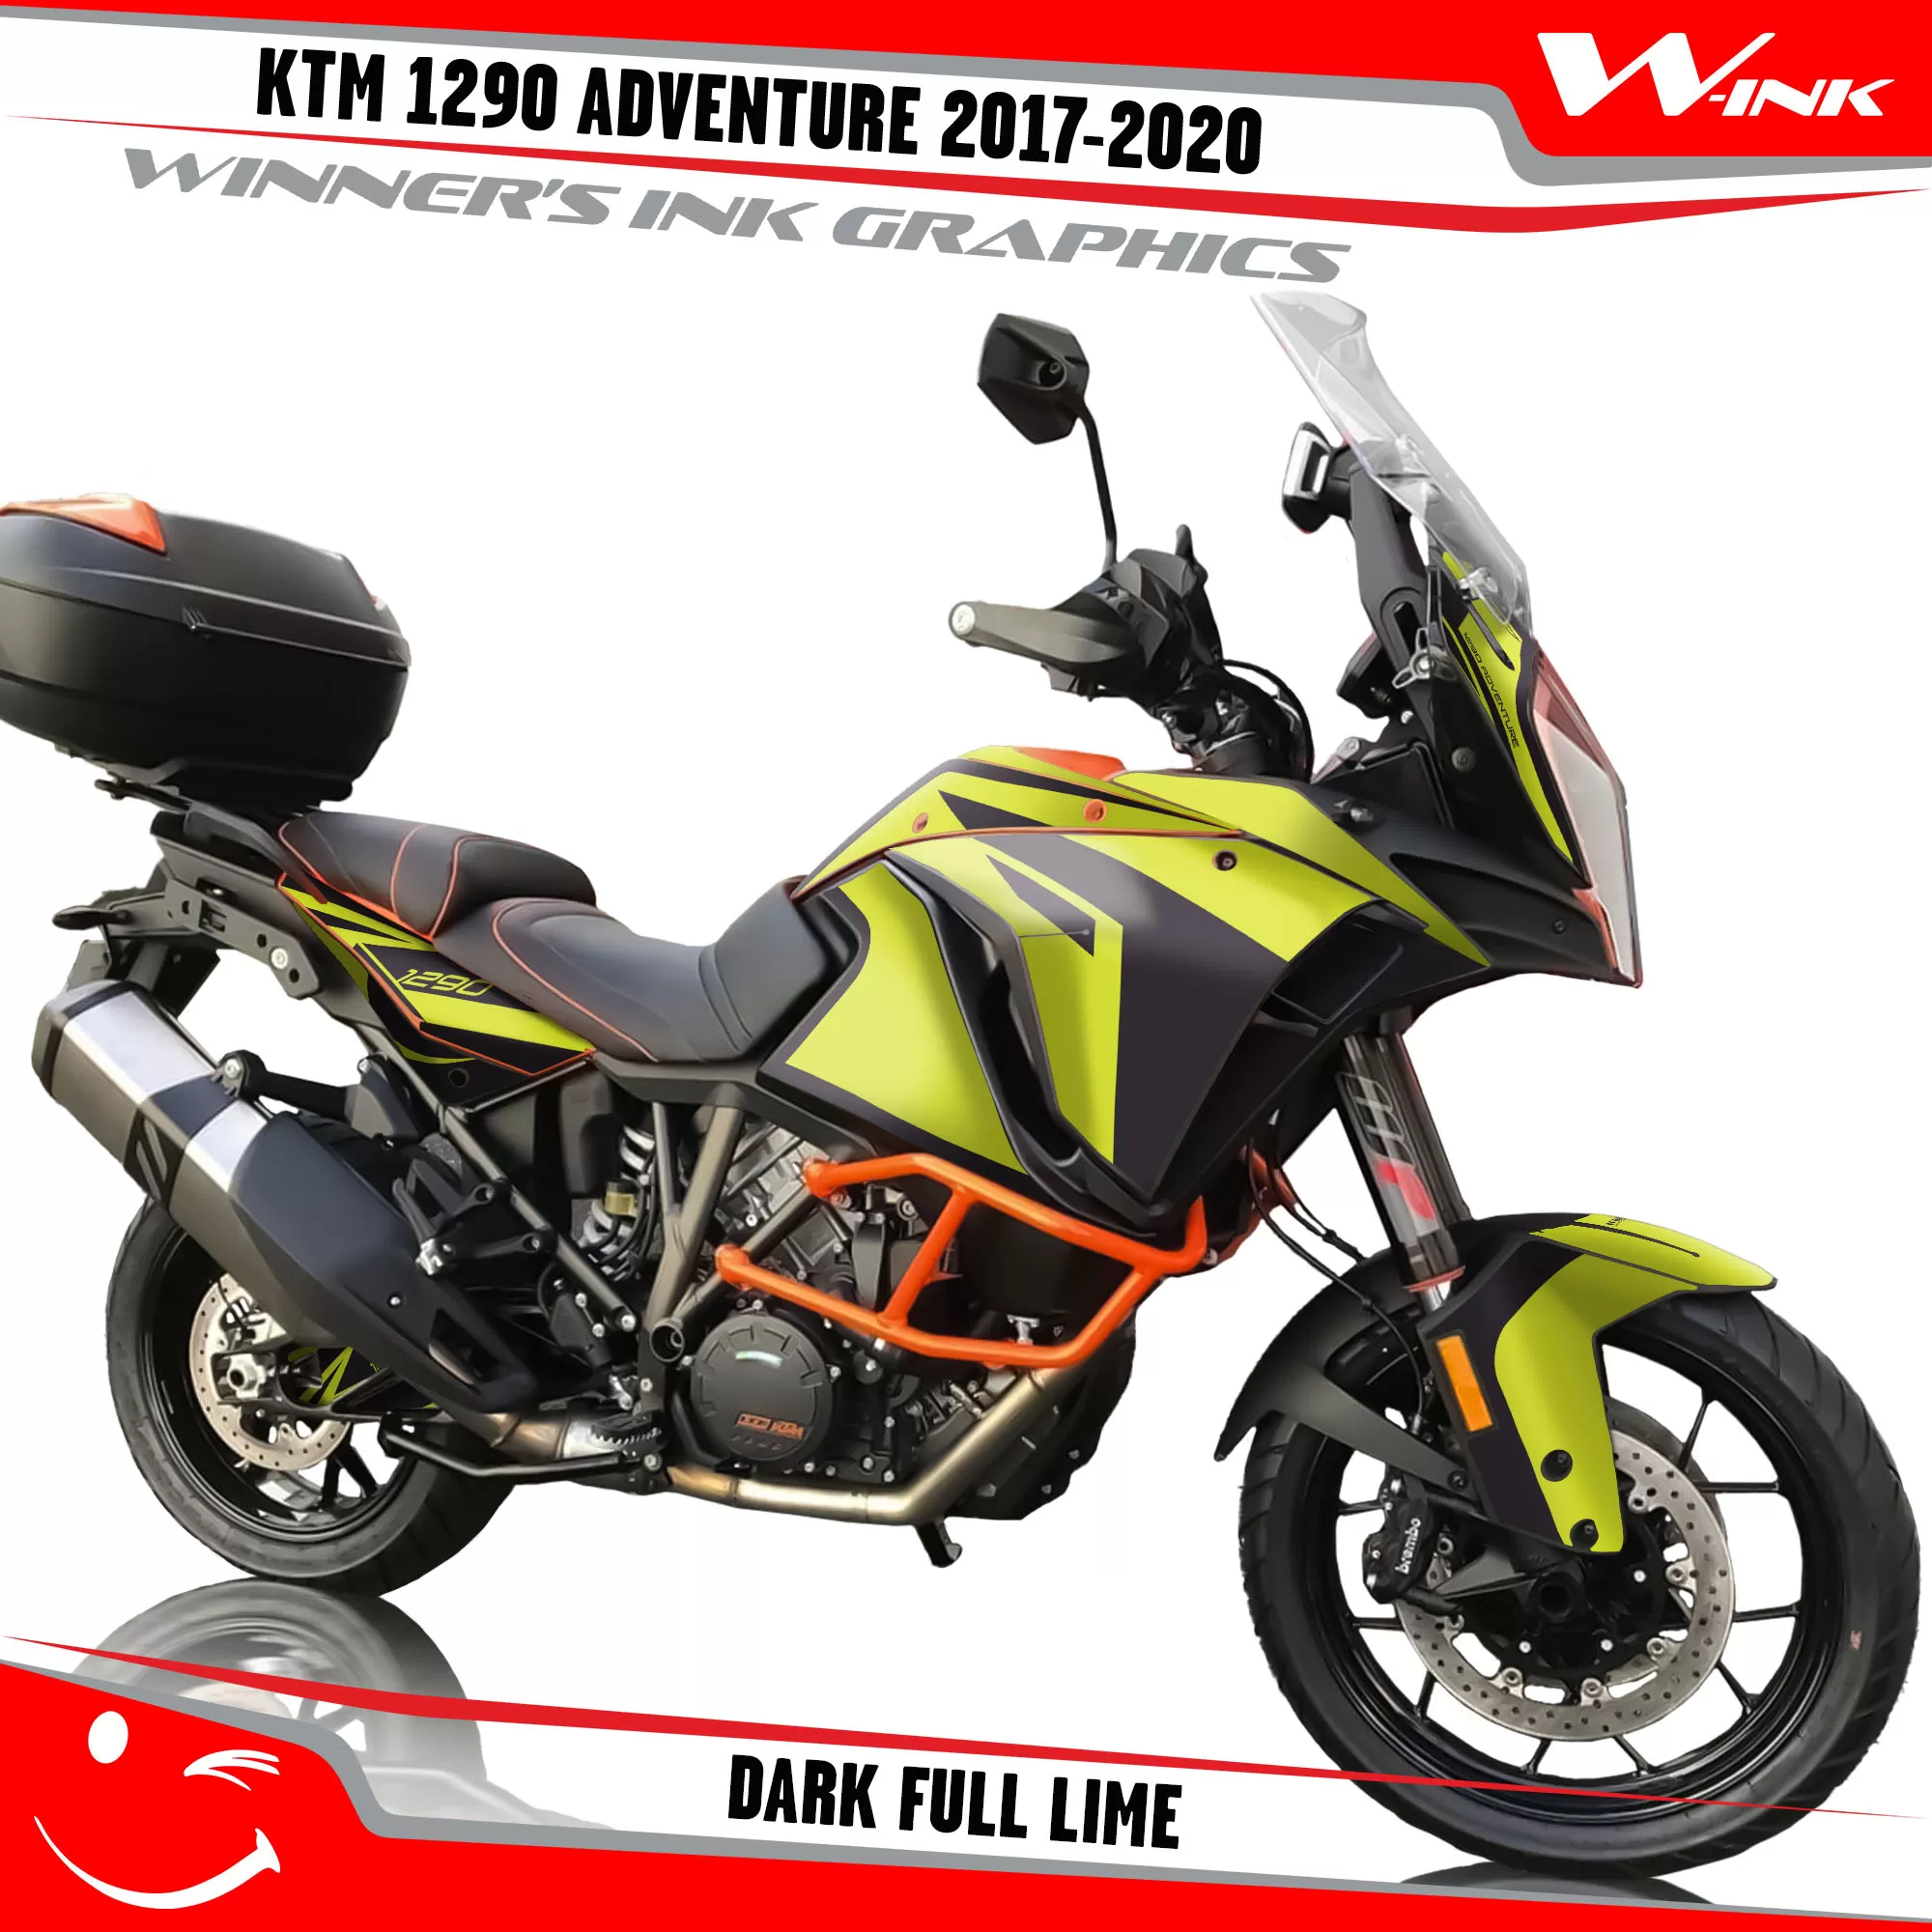 KTM-Adventure-1290-2017-2018-2019-2020-graphics-kit-and-decals-Dark-Full-Lime